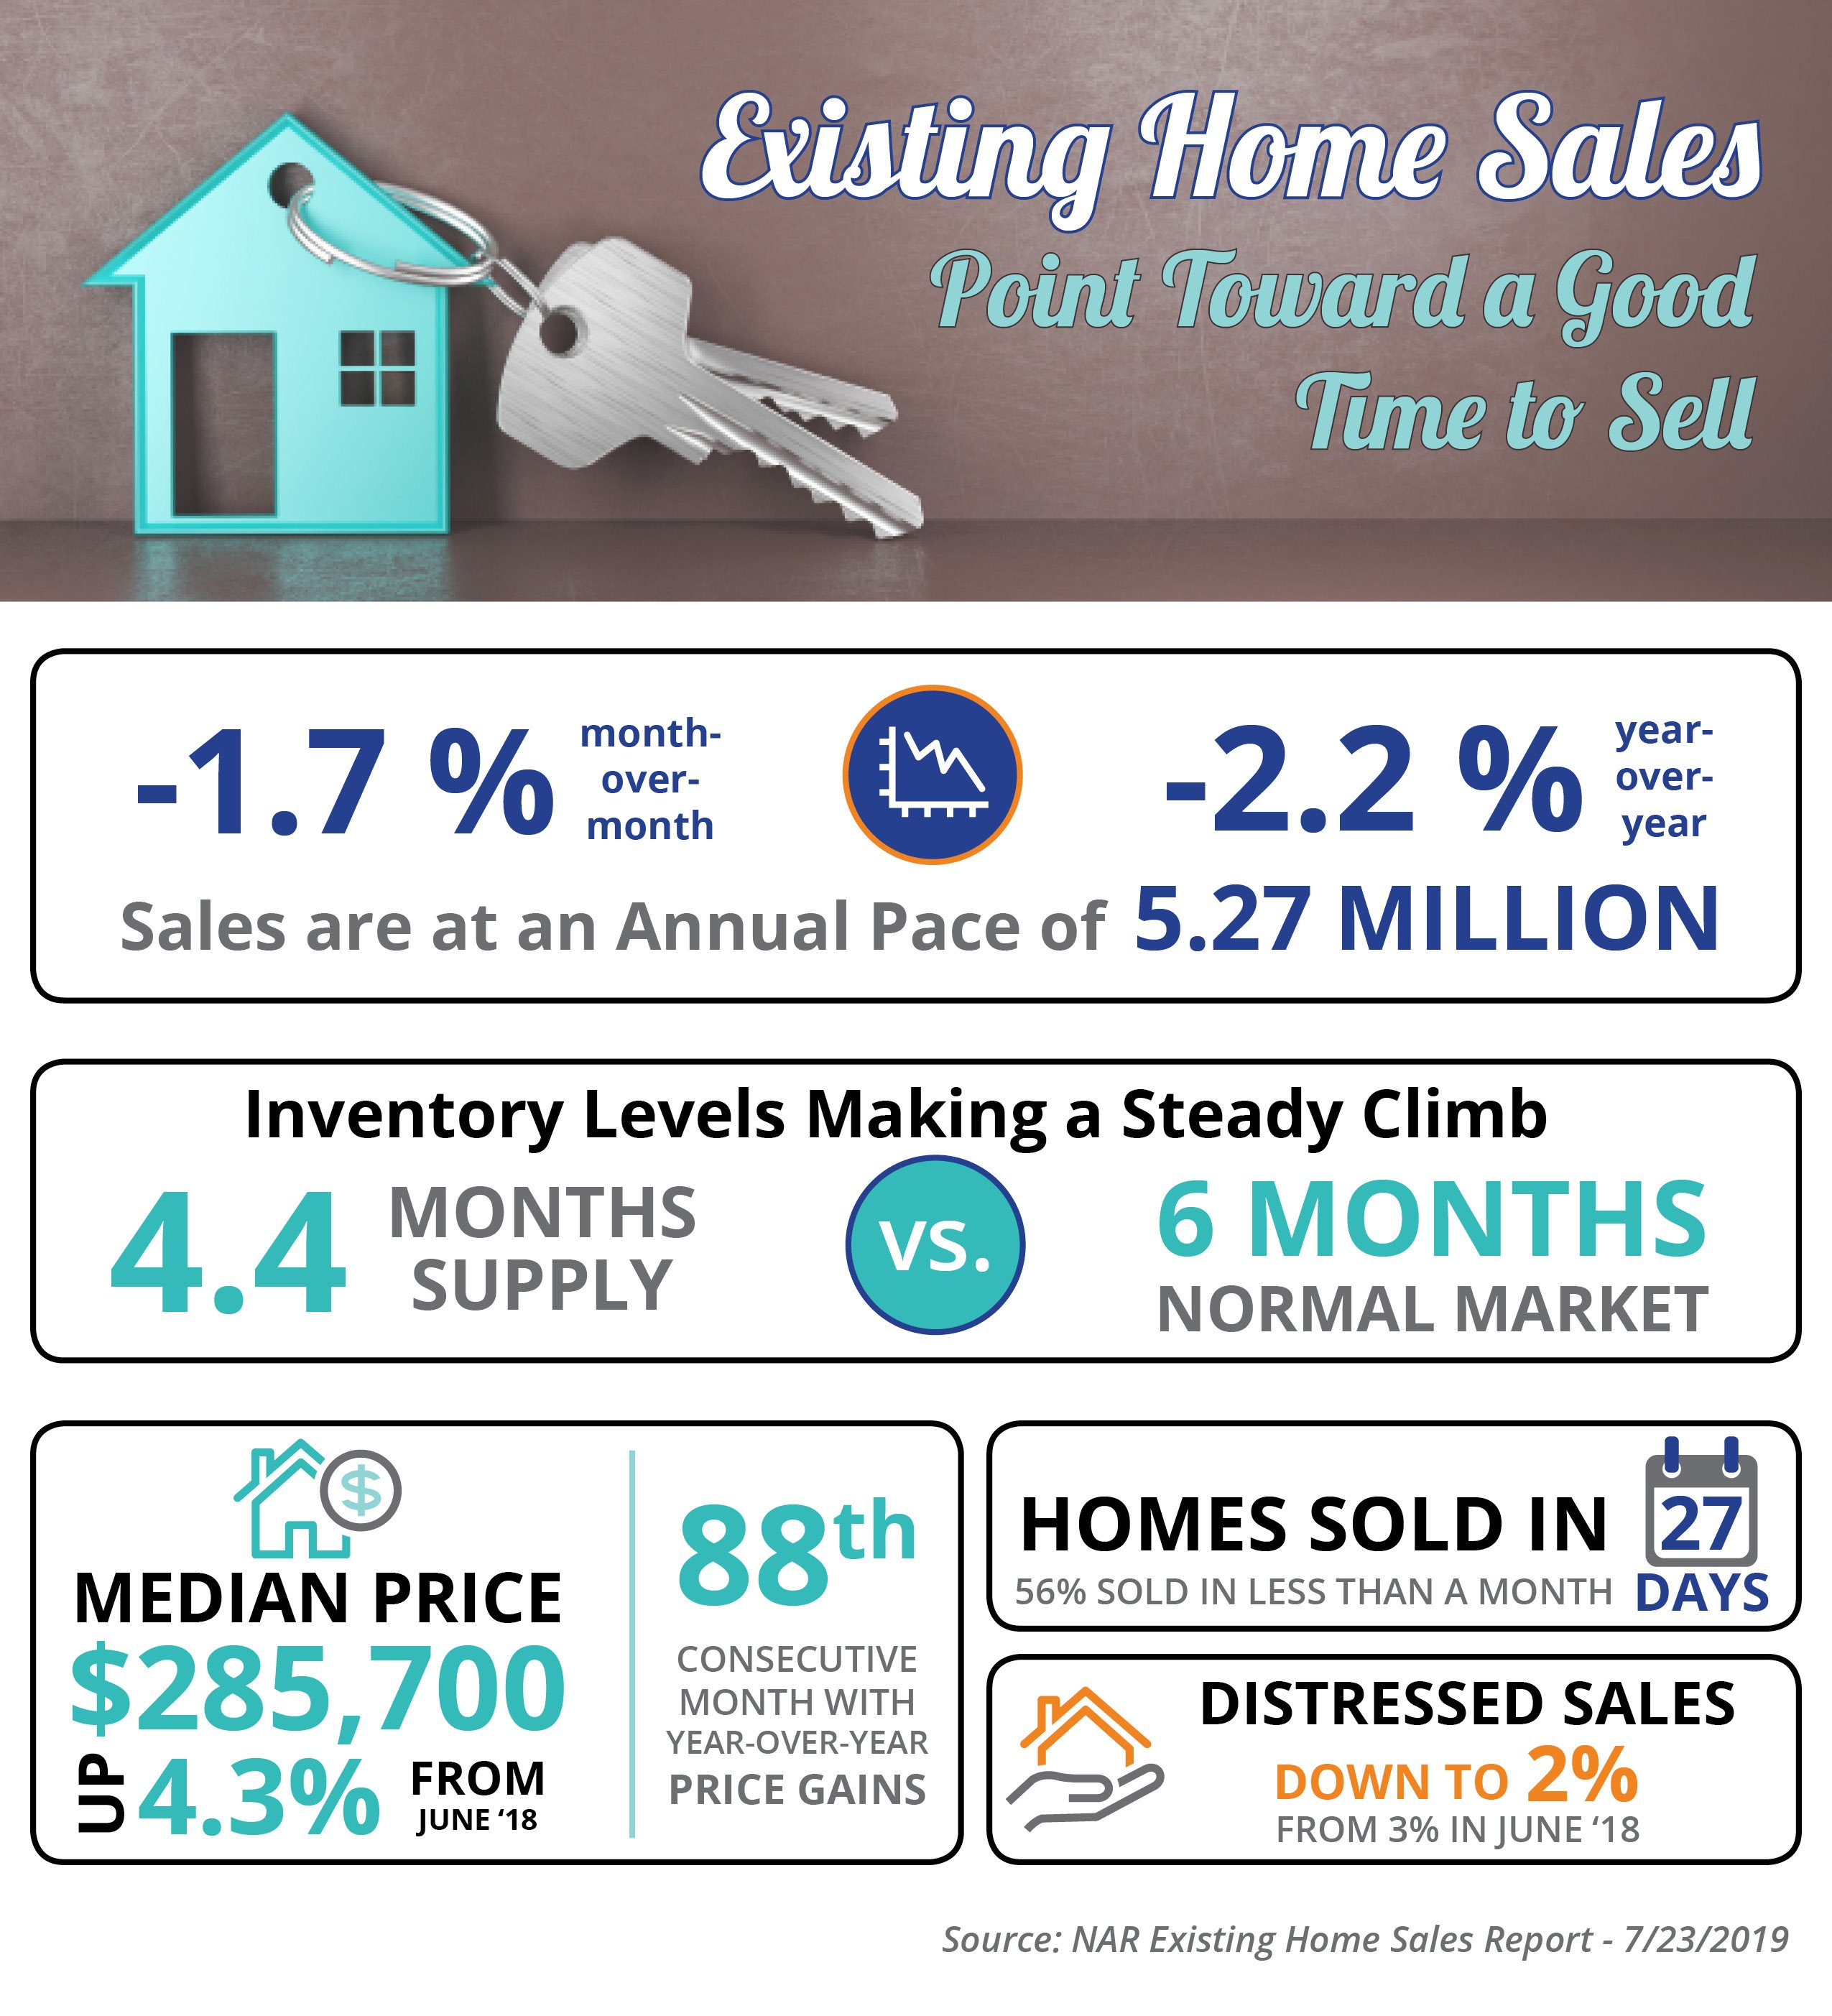 Existing Home Sales Point Toward a Good Time to Sell [INFOGRAPHIC] | Simplifying The Market